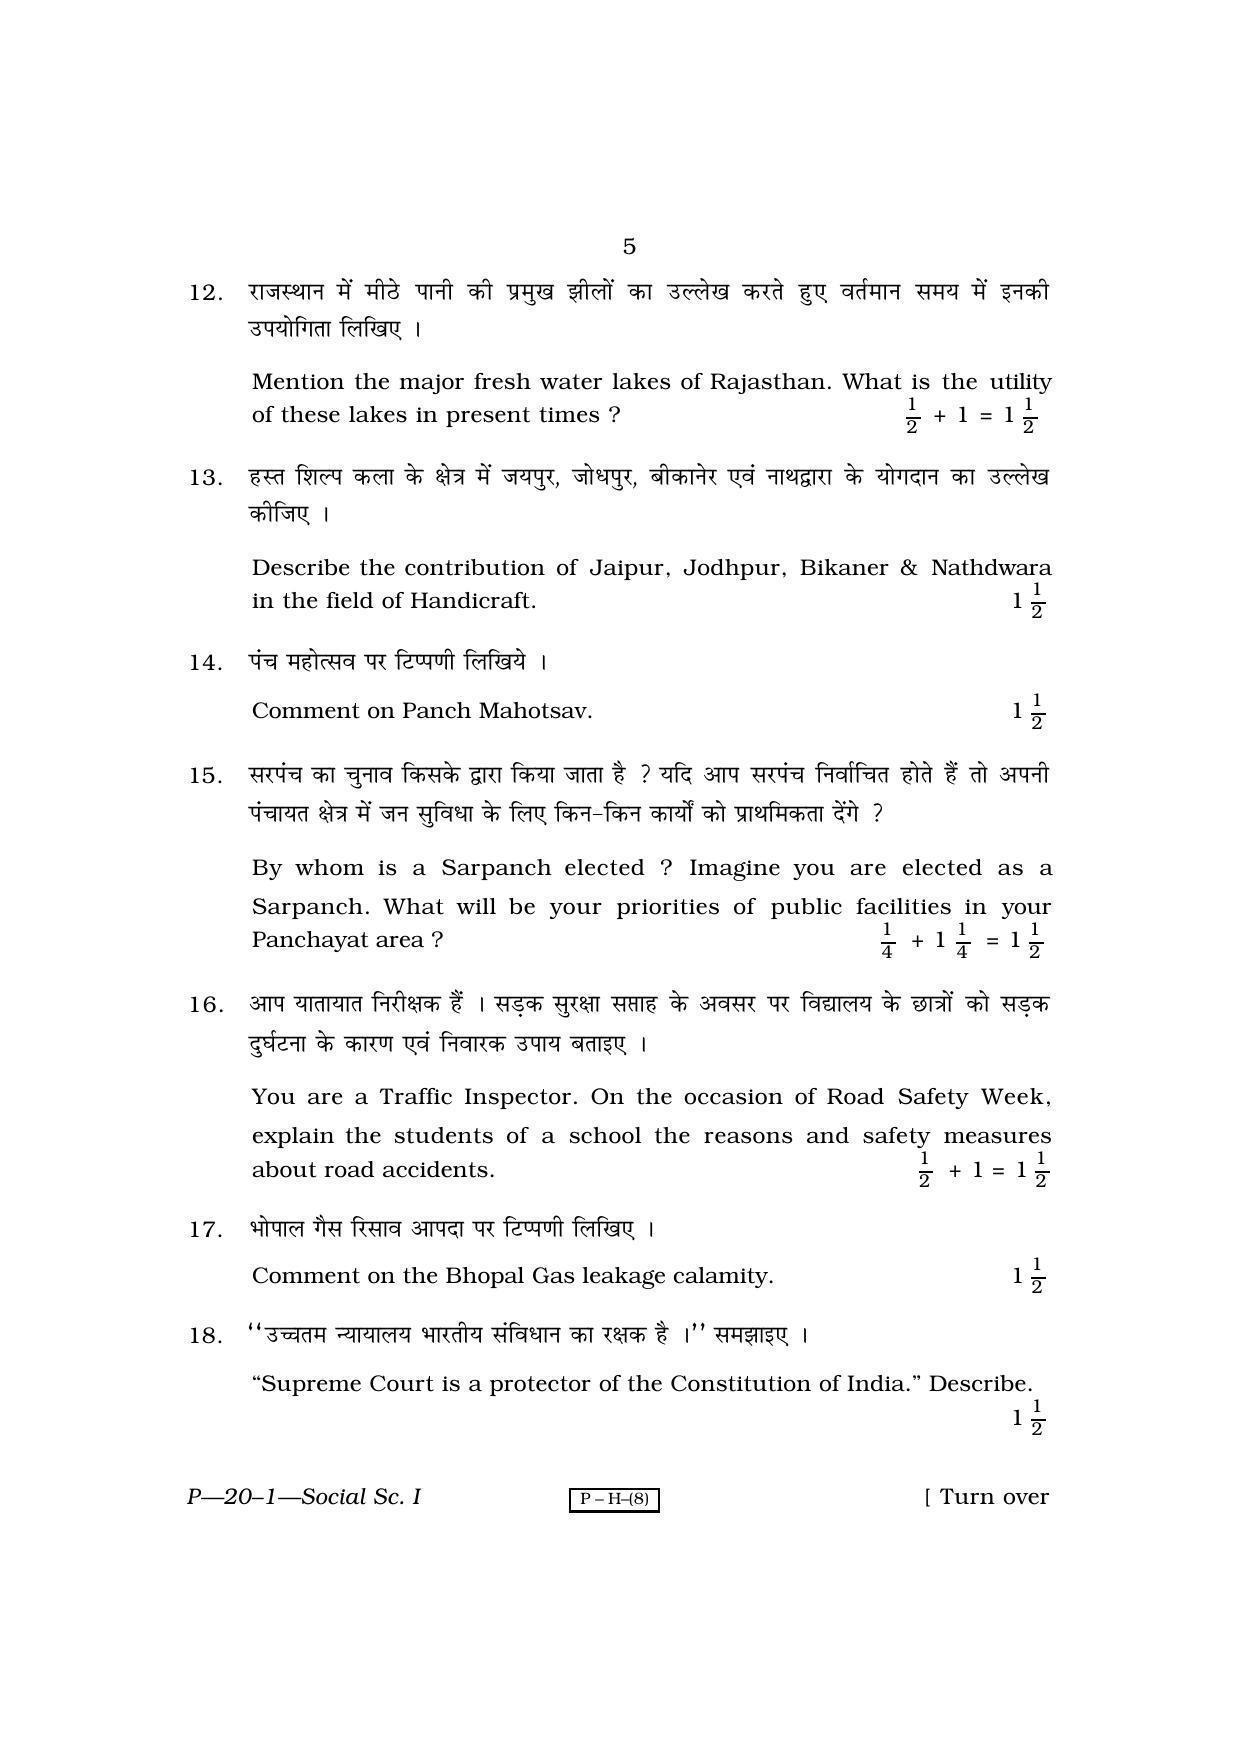 RBSE 2010 Social Science I Praveshika Question Paper - Page 5